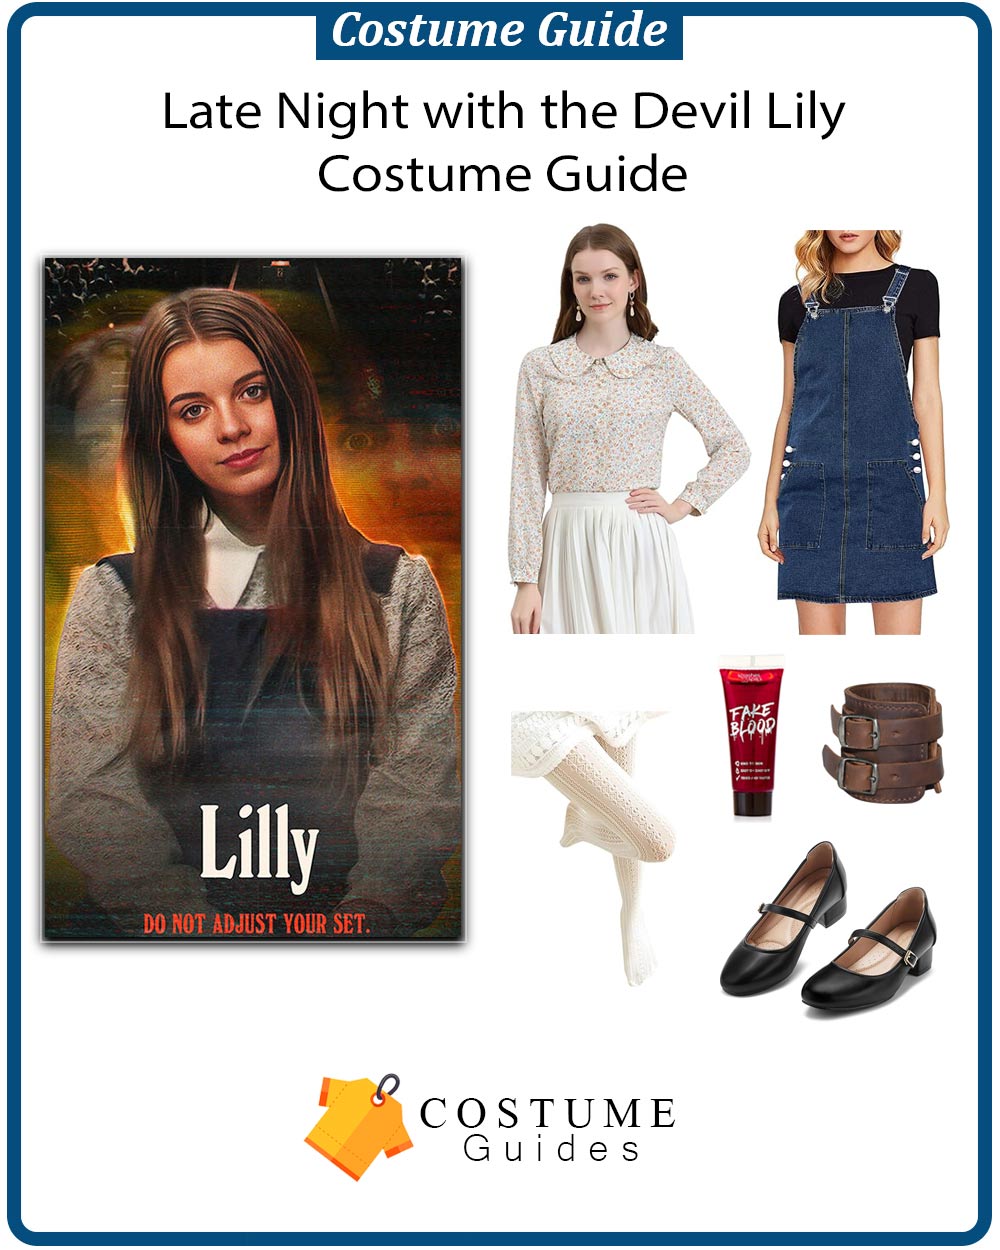 lily-ingrid-torelli-late-night-with-the-devil-costume